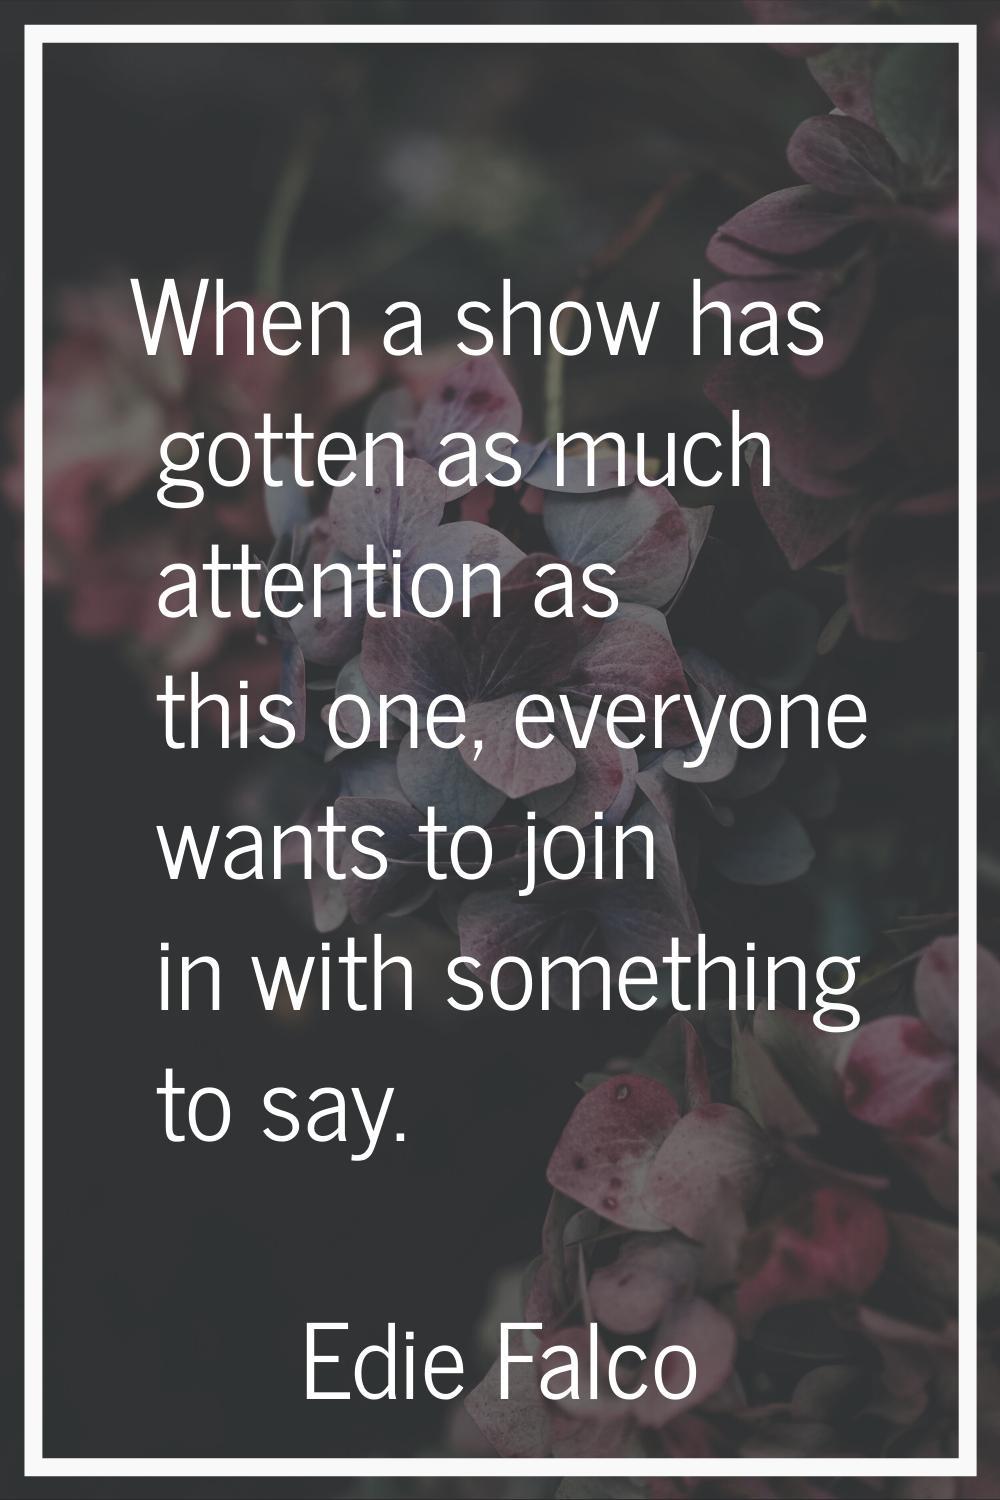 When a show has gotten as much attention as this one, everyone wants to join in with something to s